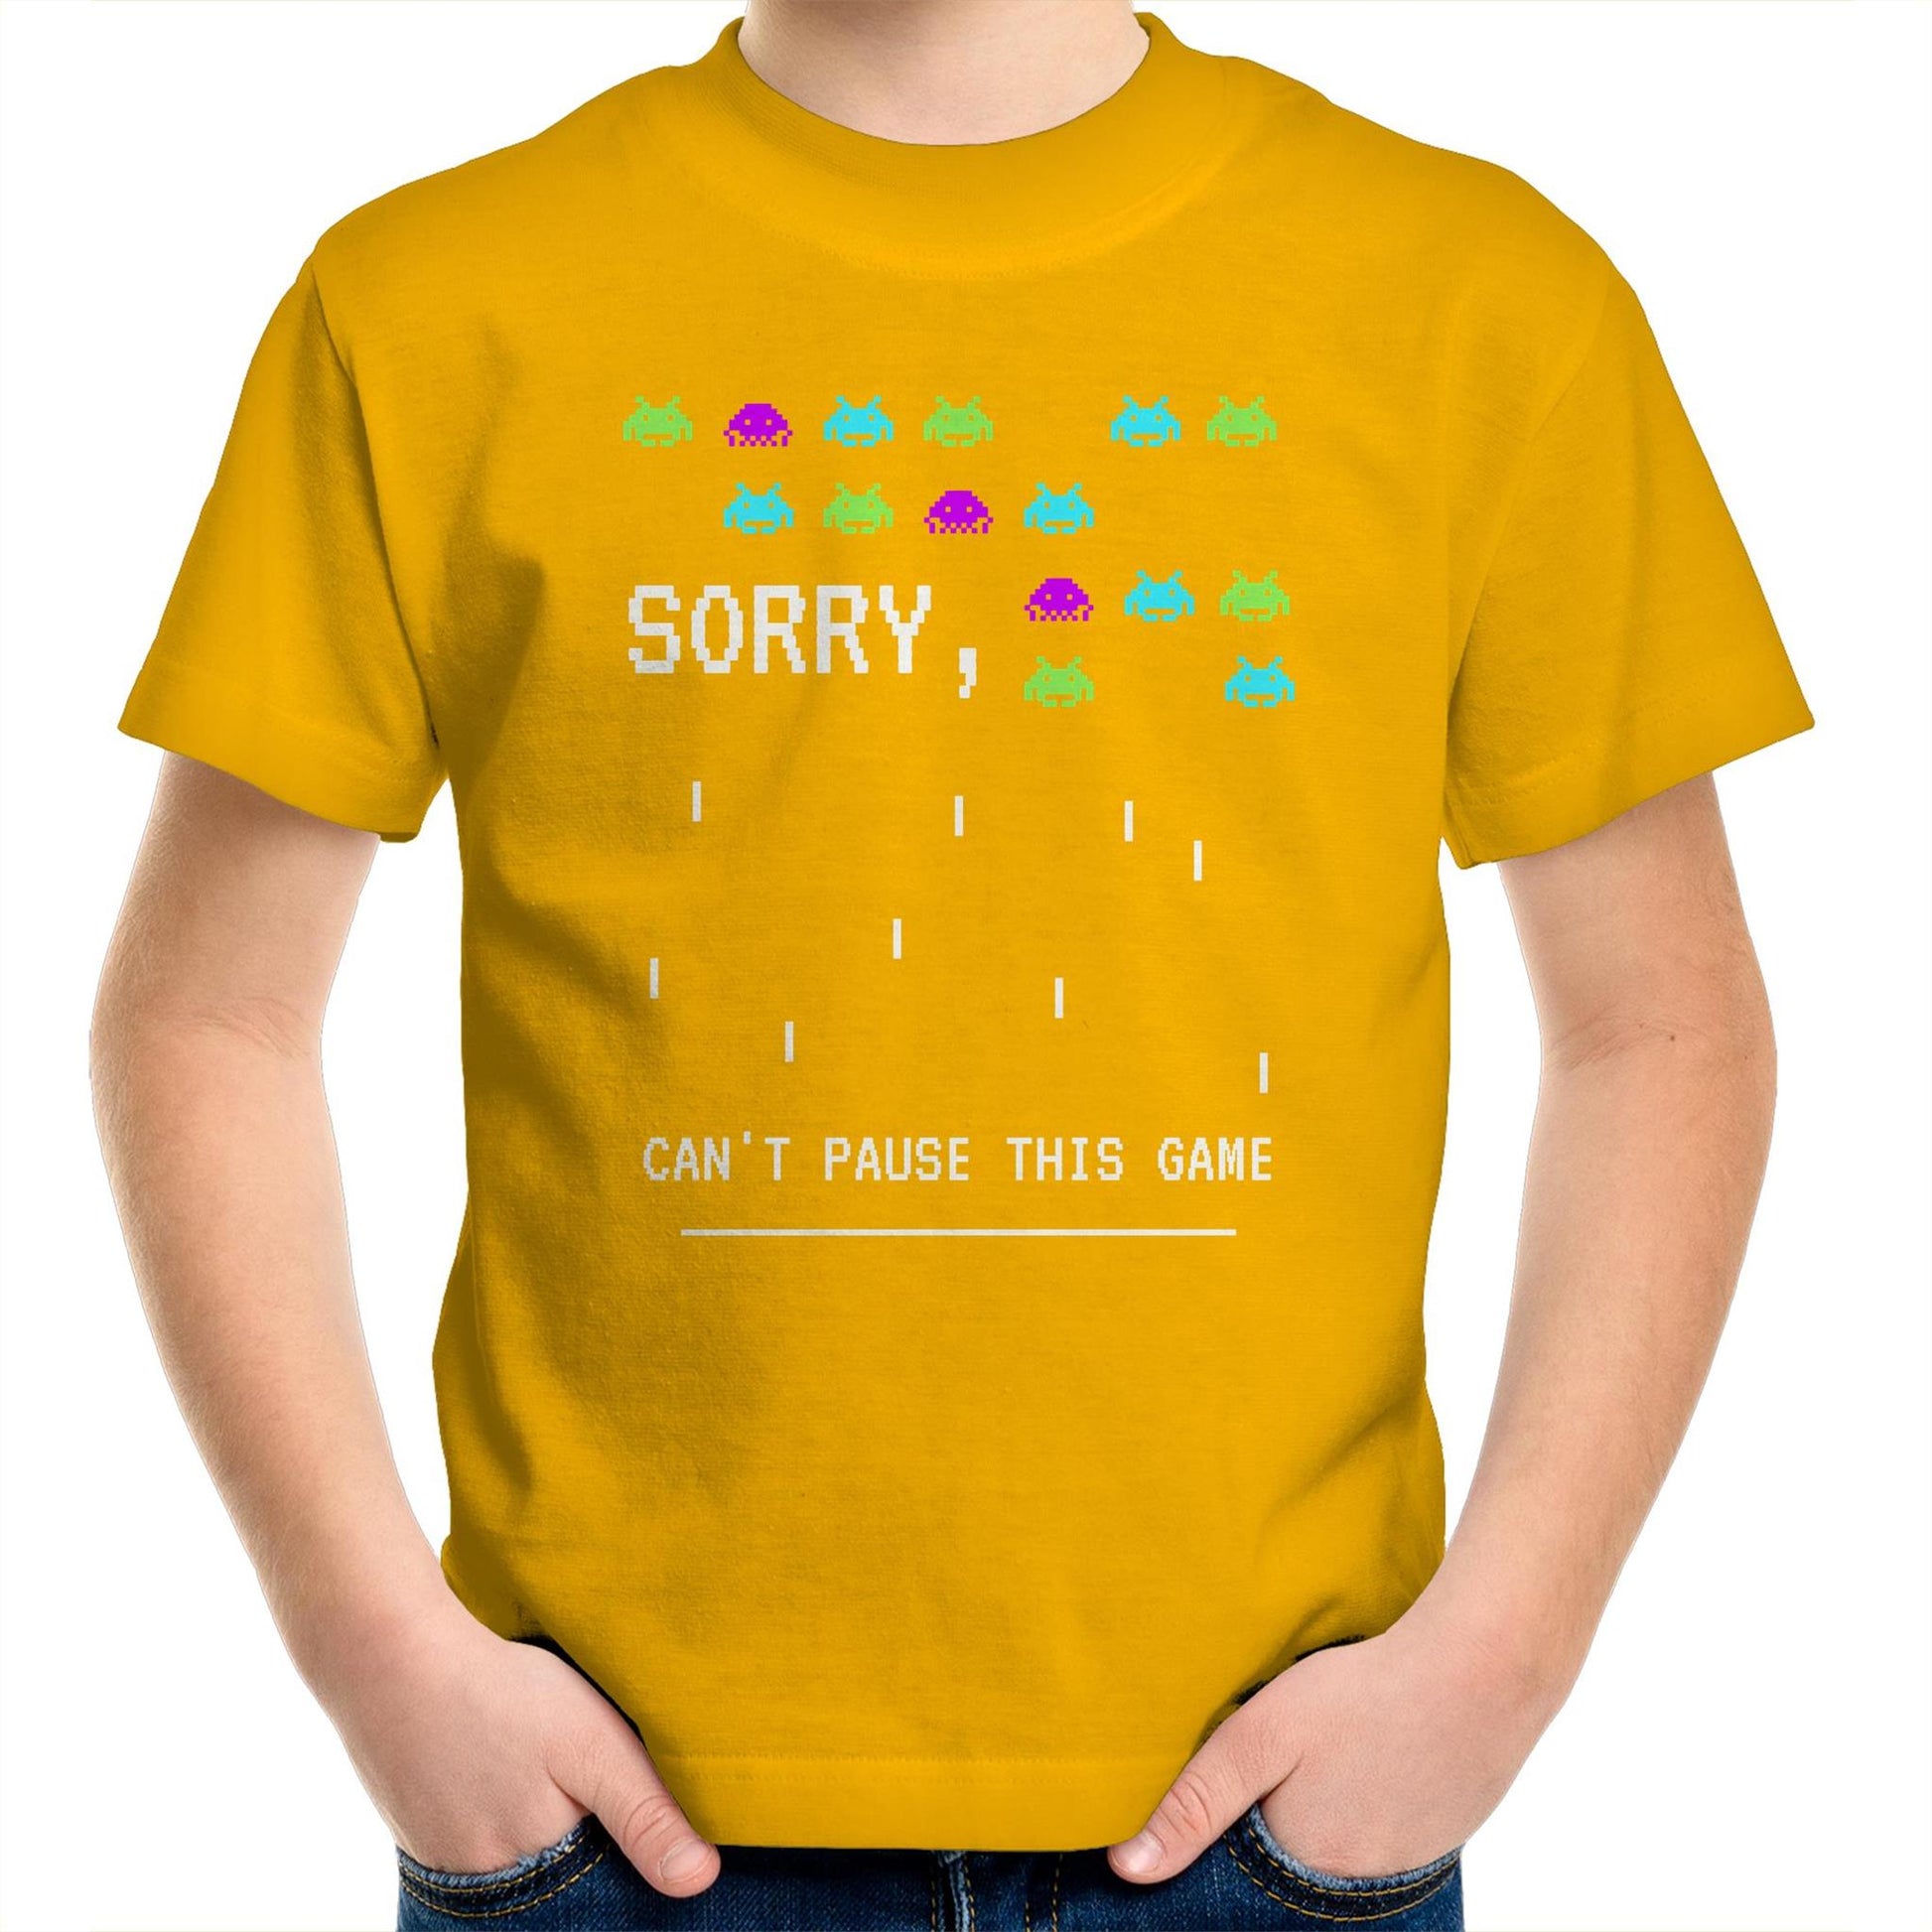 Sorry, Can't Pause This Game - Kids Youth Crew T-Shirt Gold Kids Youth T-shirt Games